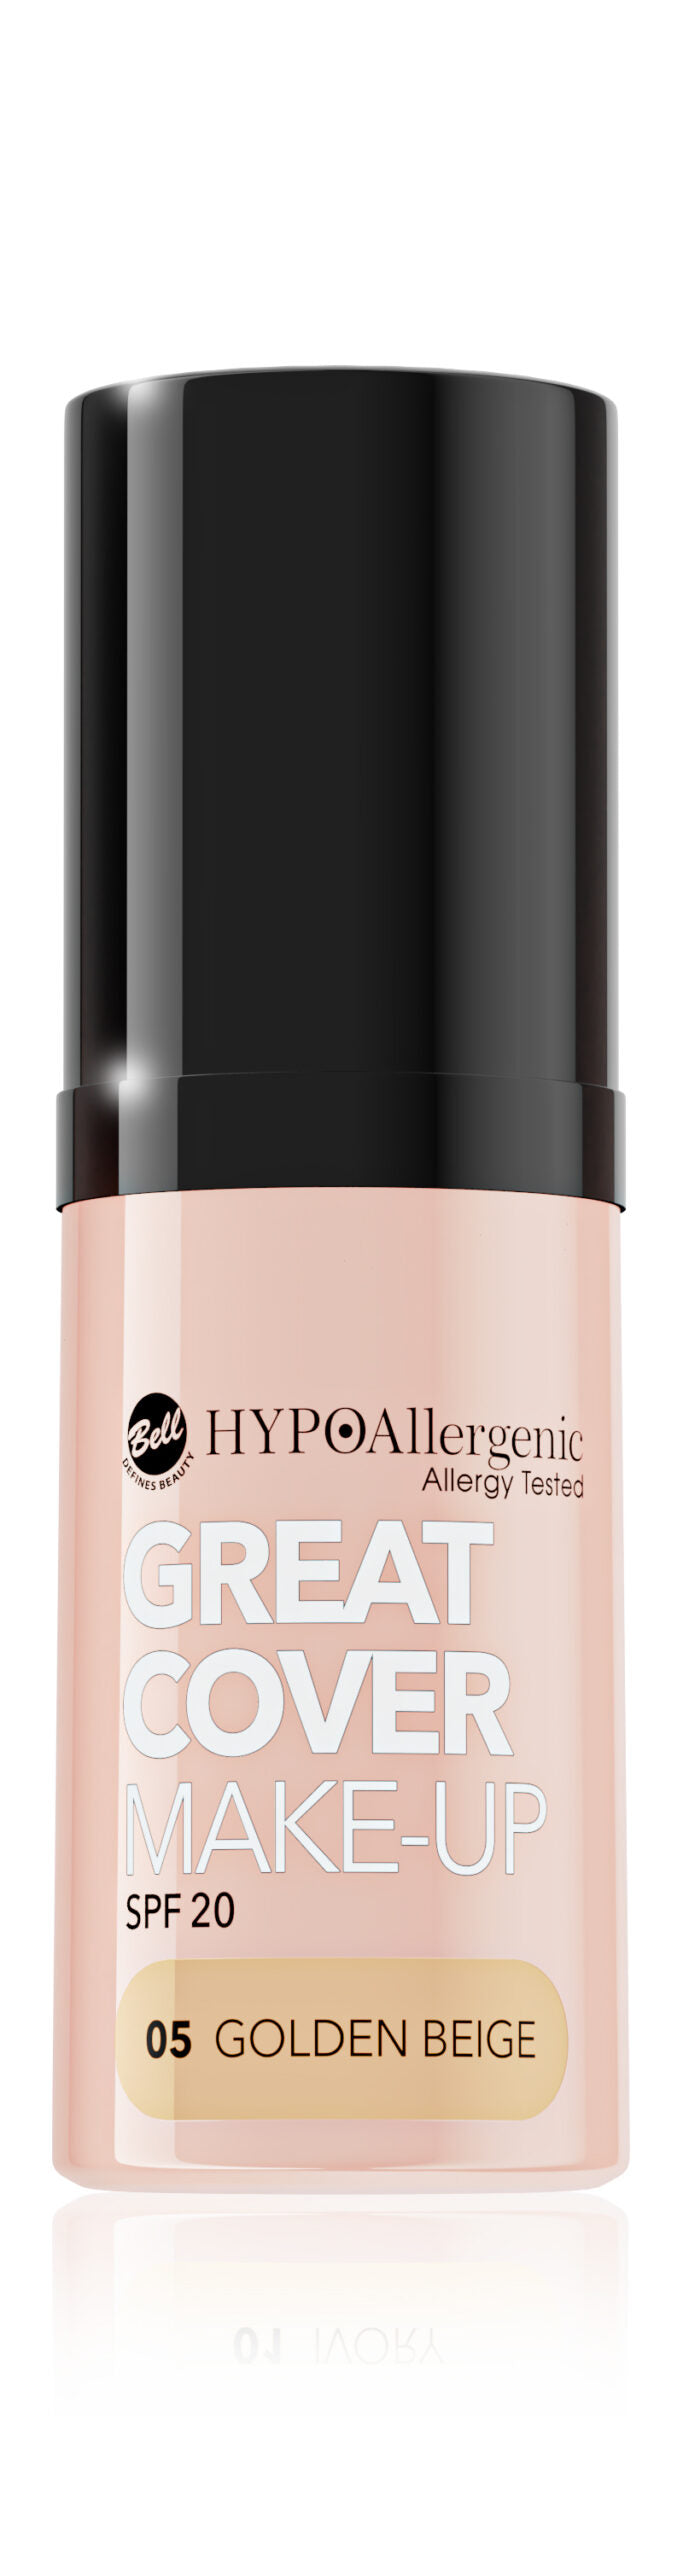 

Hypoallergenic Great Cover Make Up High Coverage Mousse Foundation SPF20 20g